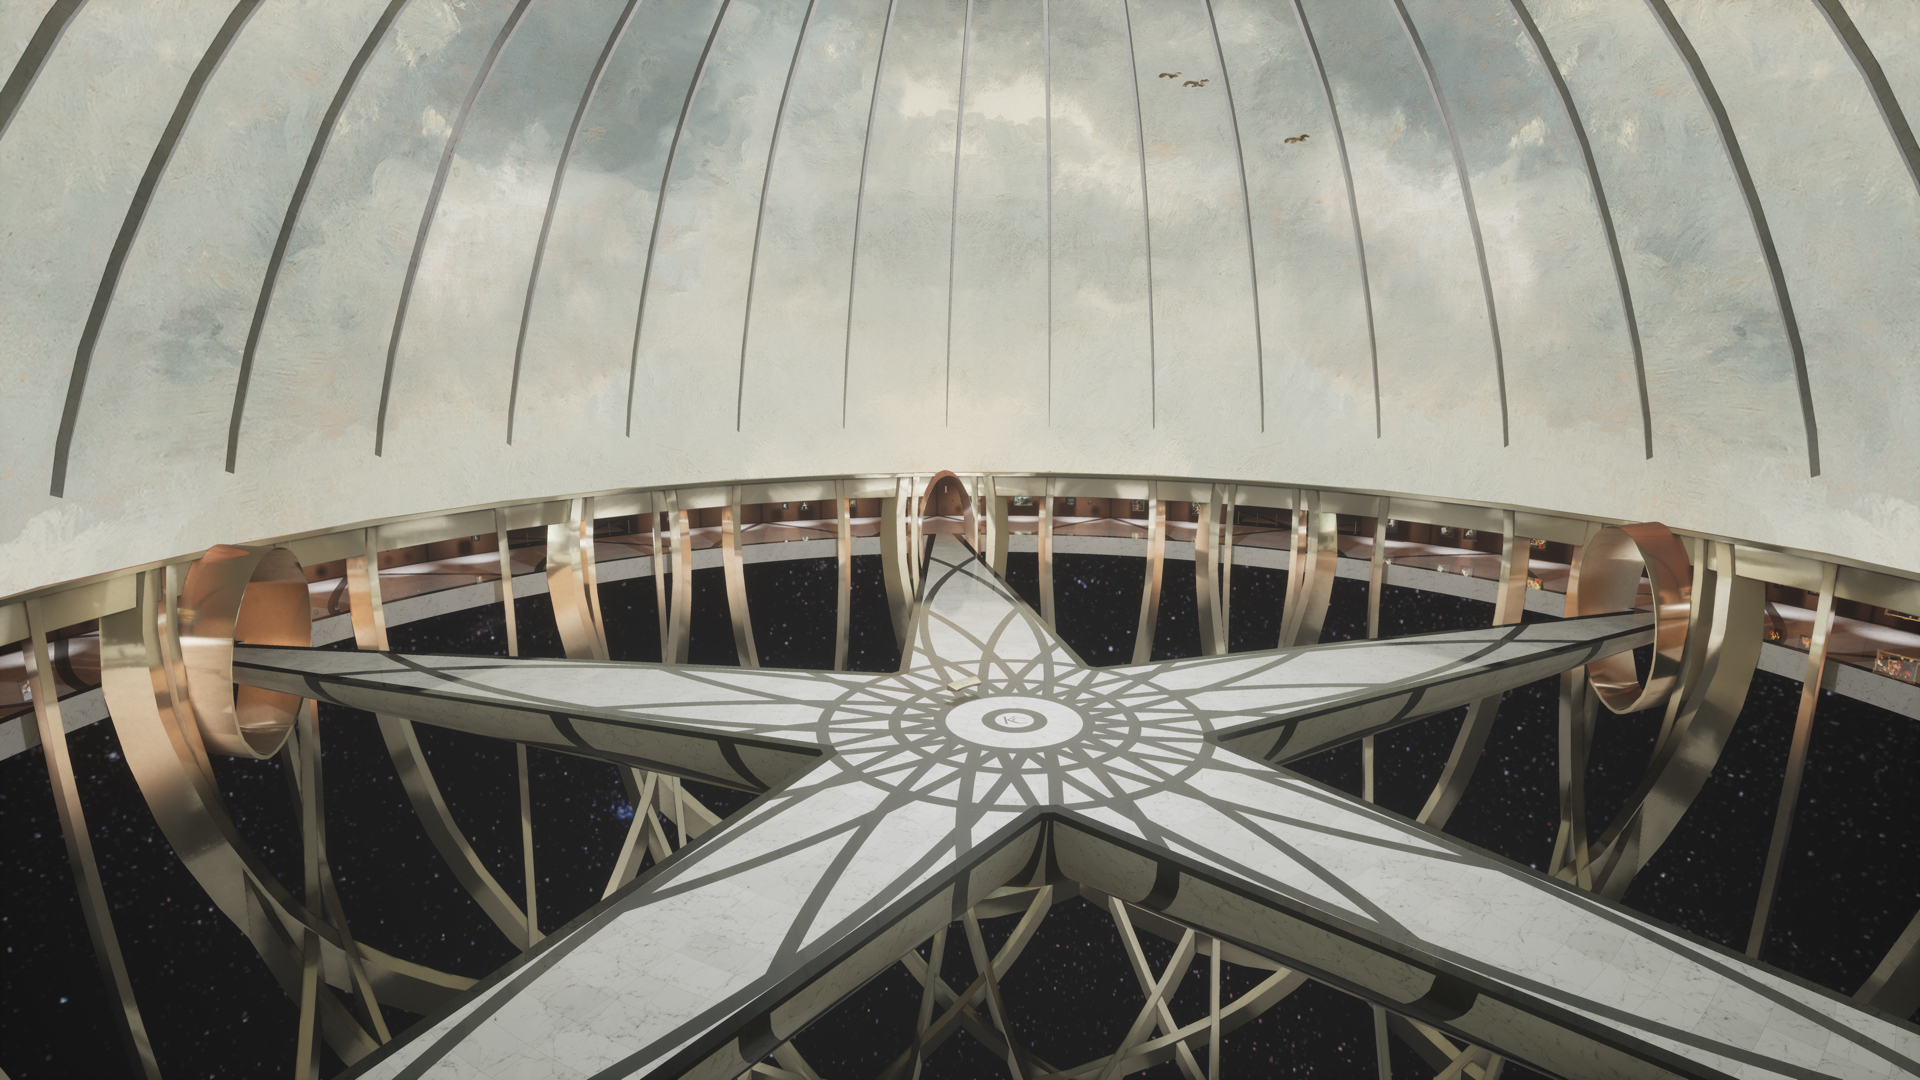 A virtual museum structure with a glass dome roof, walkways and exhibits along the outer wall, and a star-like platform of walkways connected to the outer ring at five points